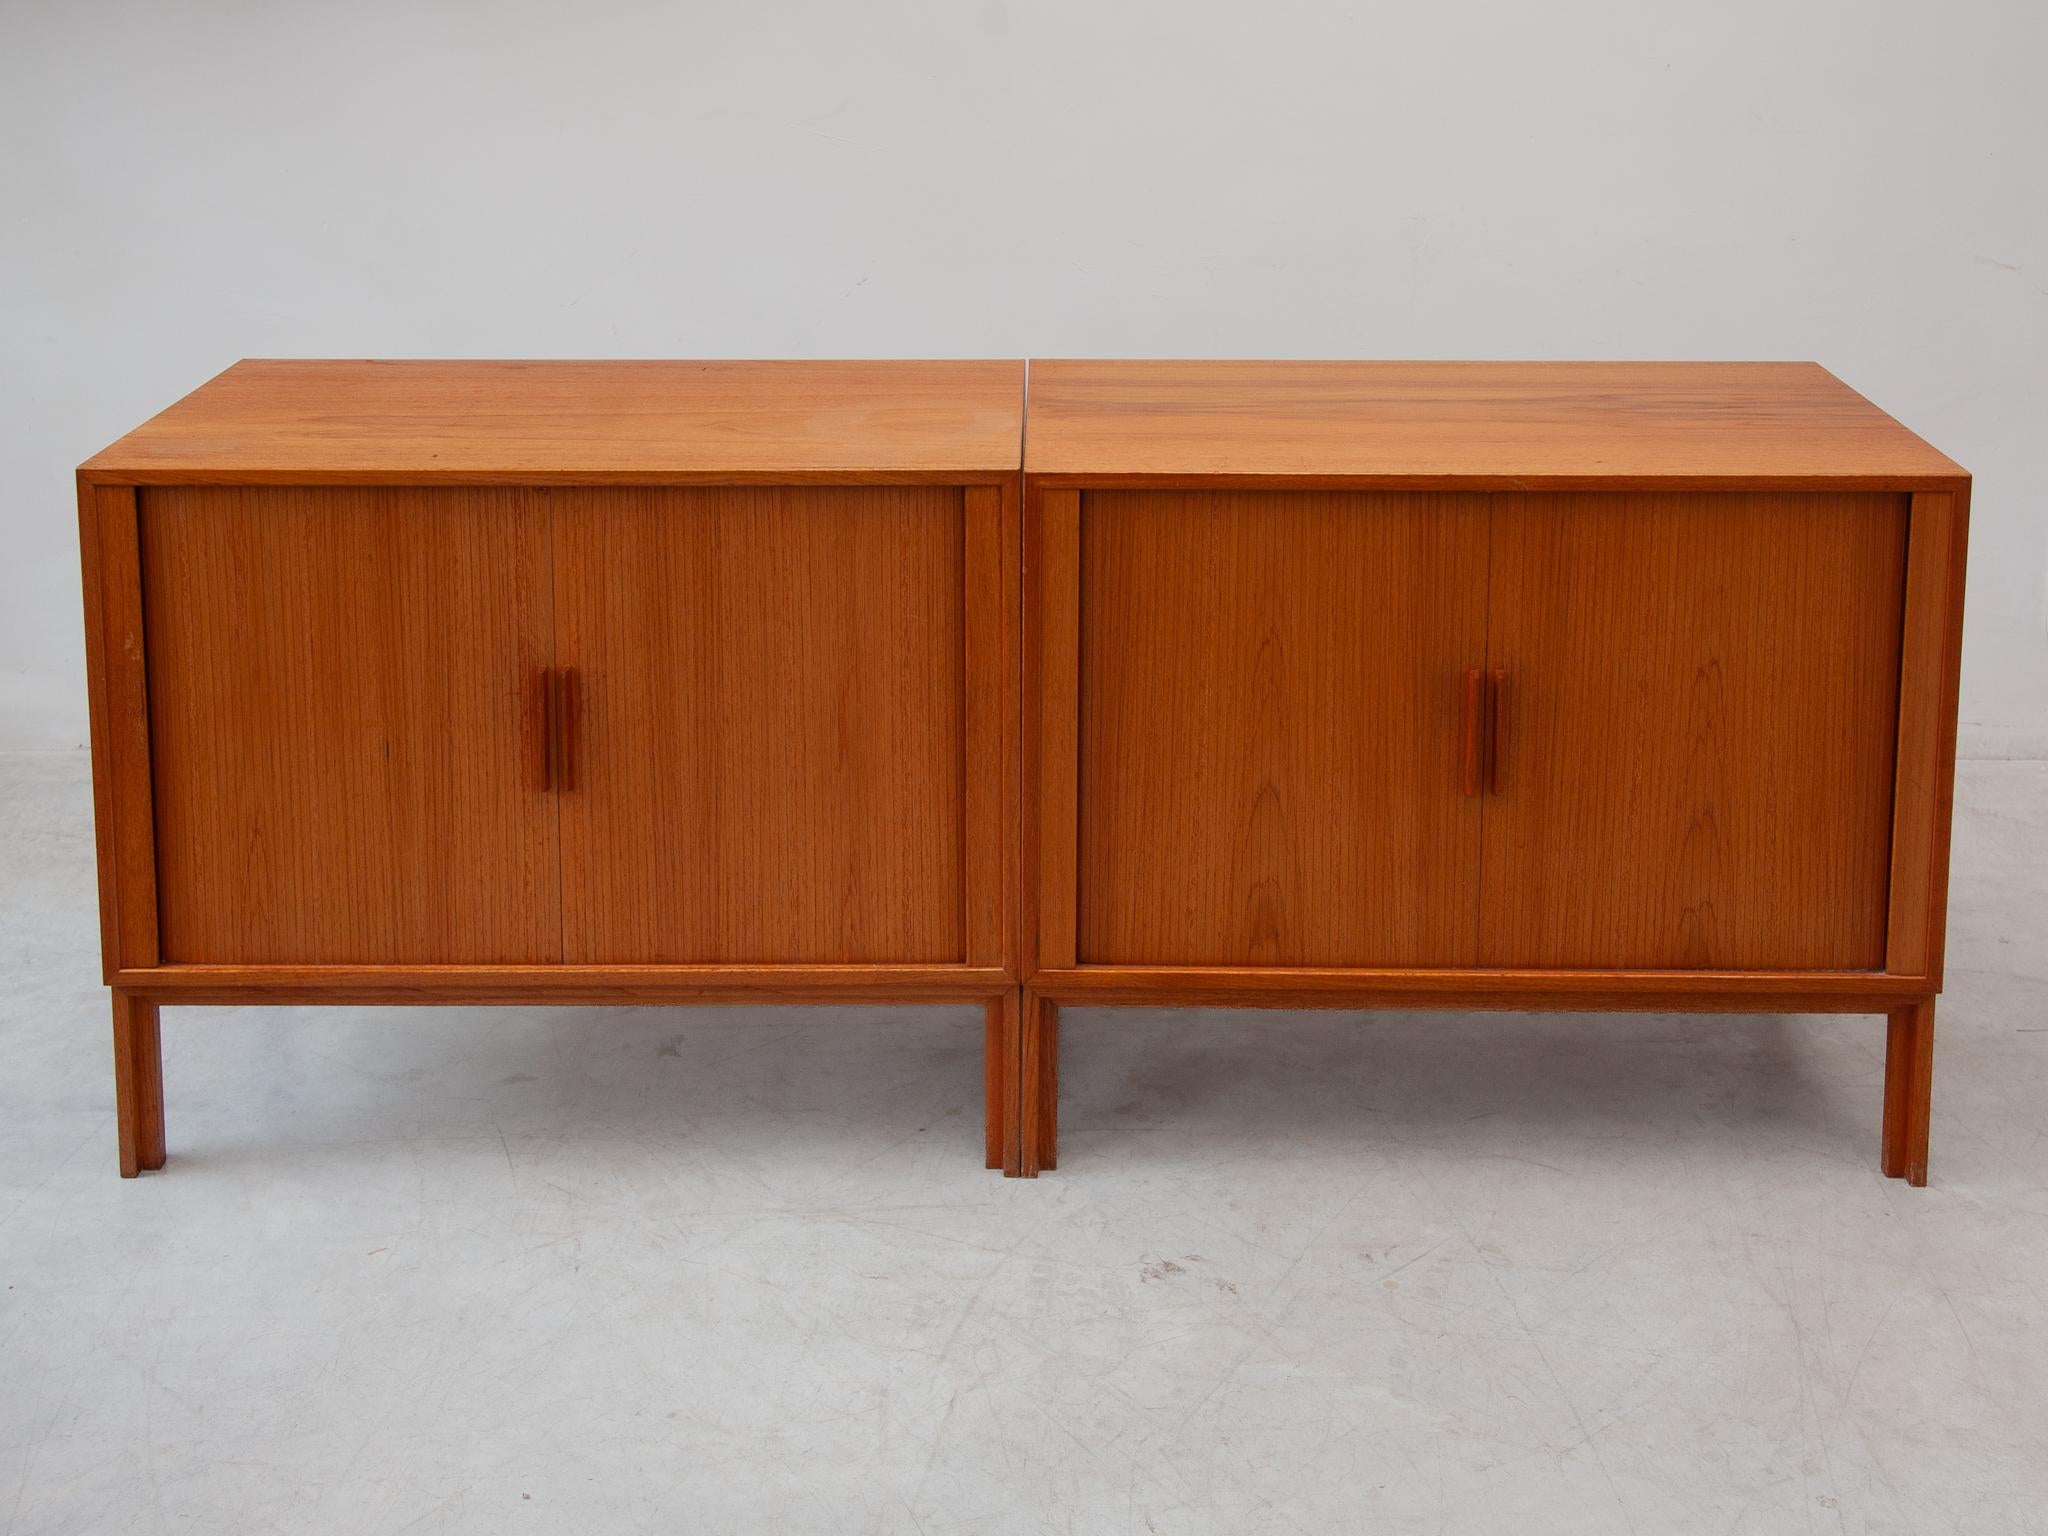 Modular Sideboard with Sliding Doors designed by Kai Kristiansen 1970s In Good Condition For Sale In Antwerp, BE